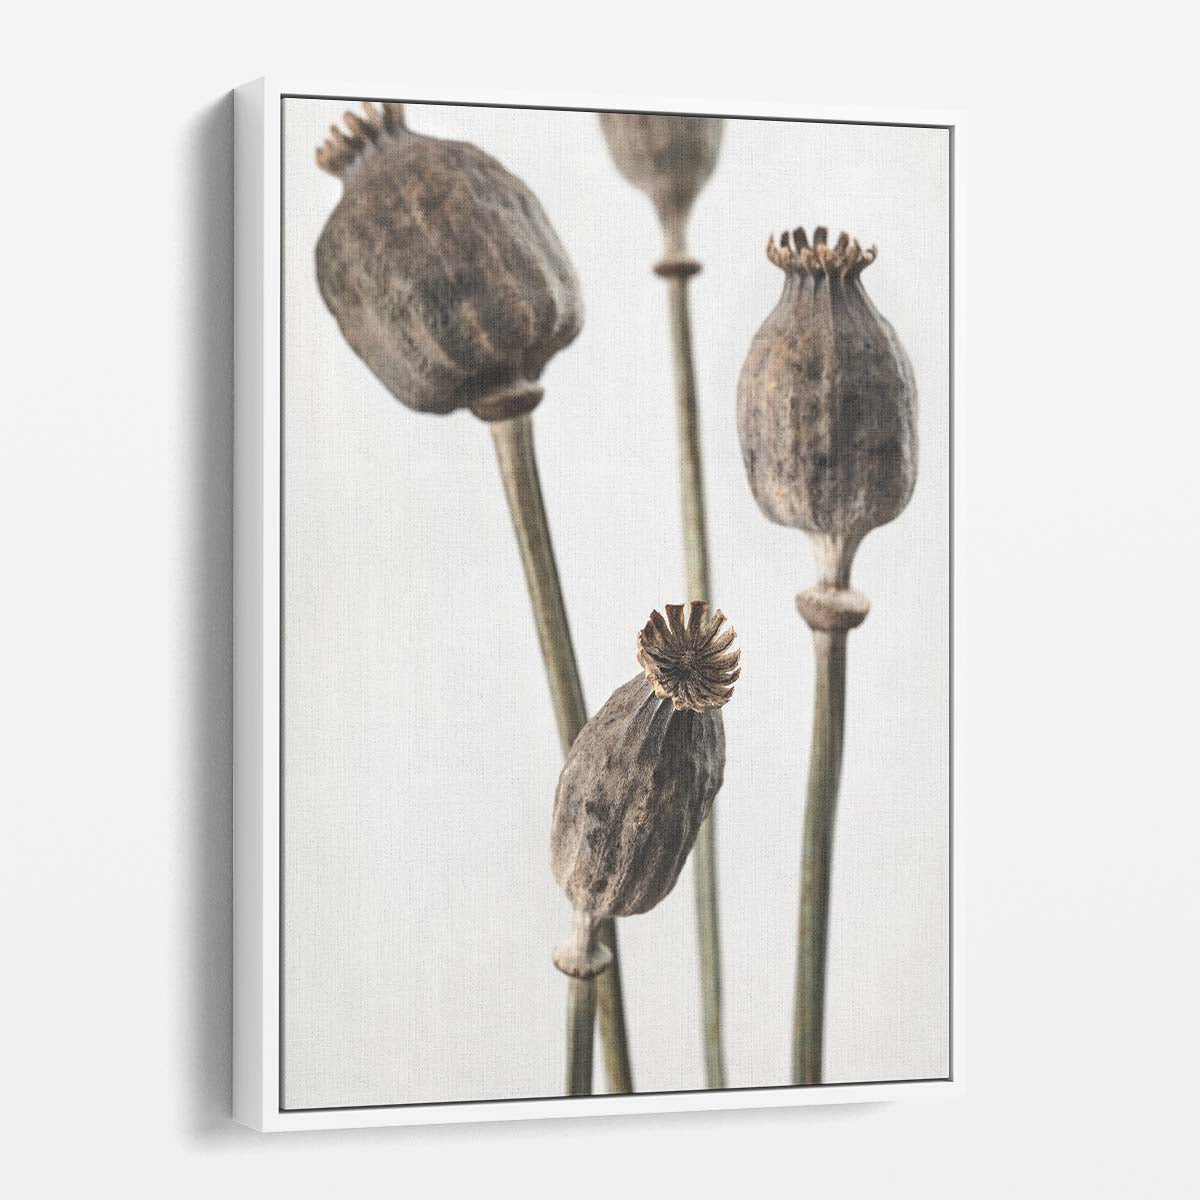 Botanical Still Life Photography of Dried Poppy Flowers by Luxuriance Designs, made in USA